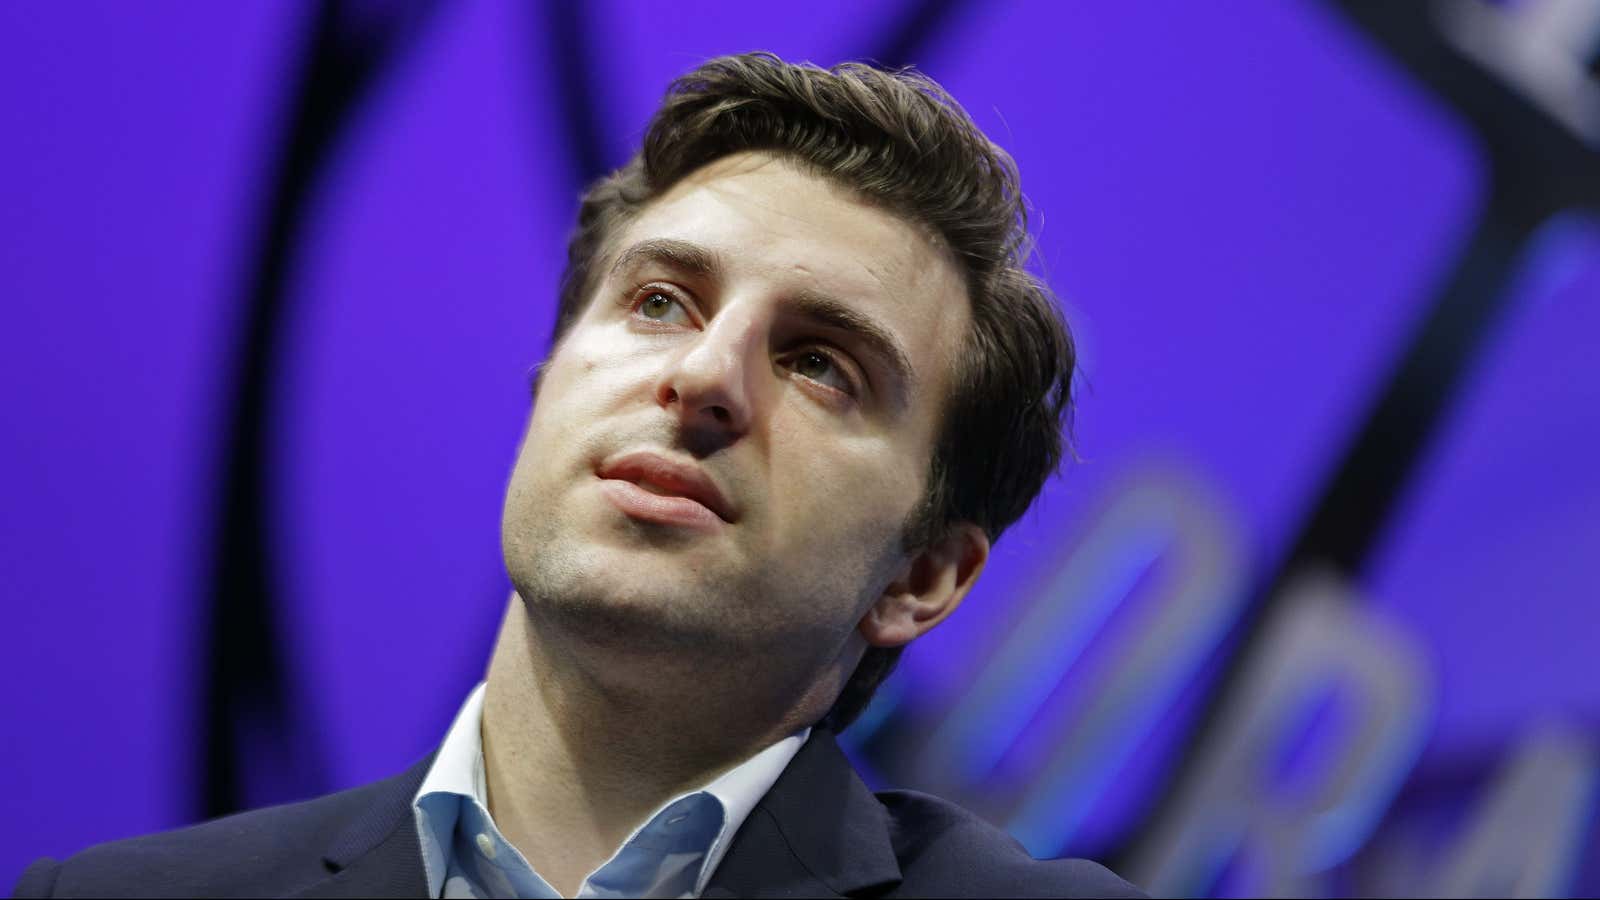 Bad news for Airbnb CEO Brian Chesky: Demand is tapering off.